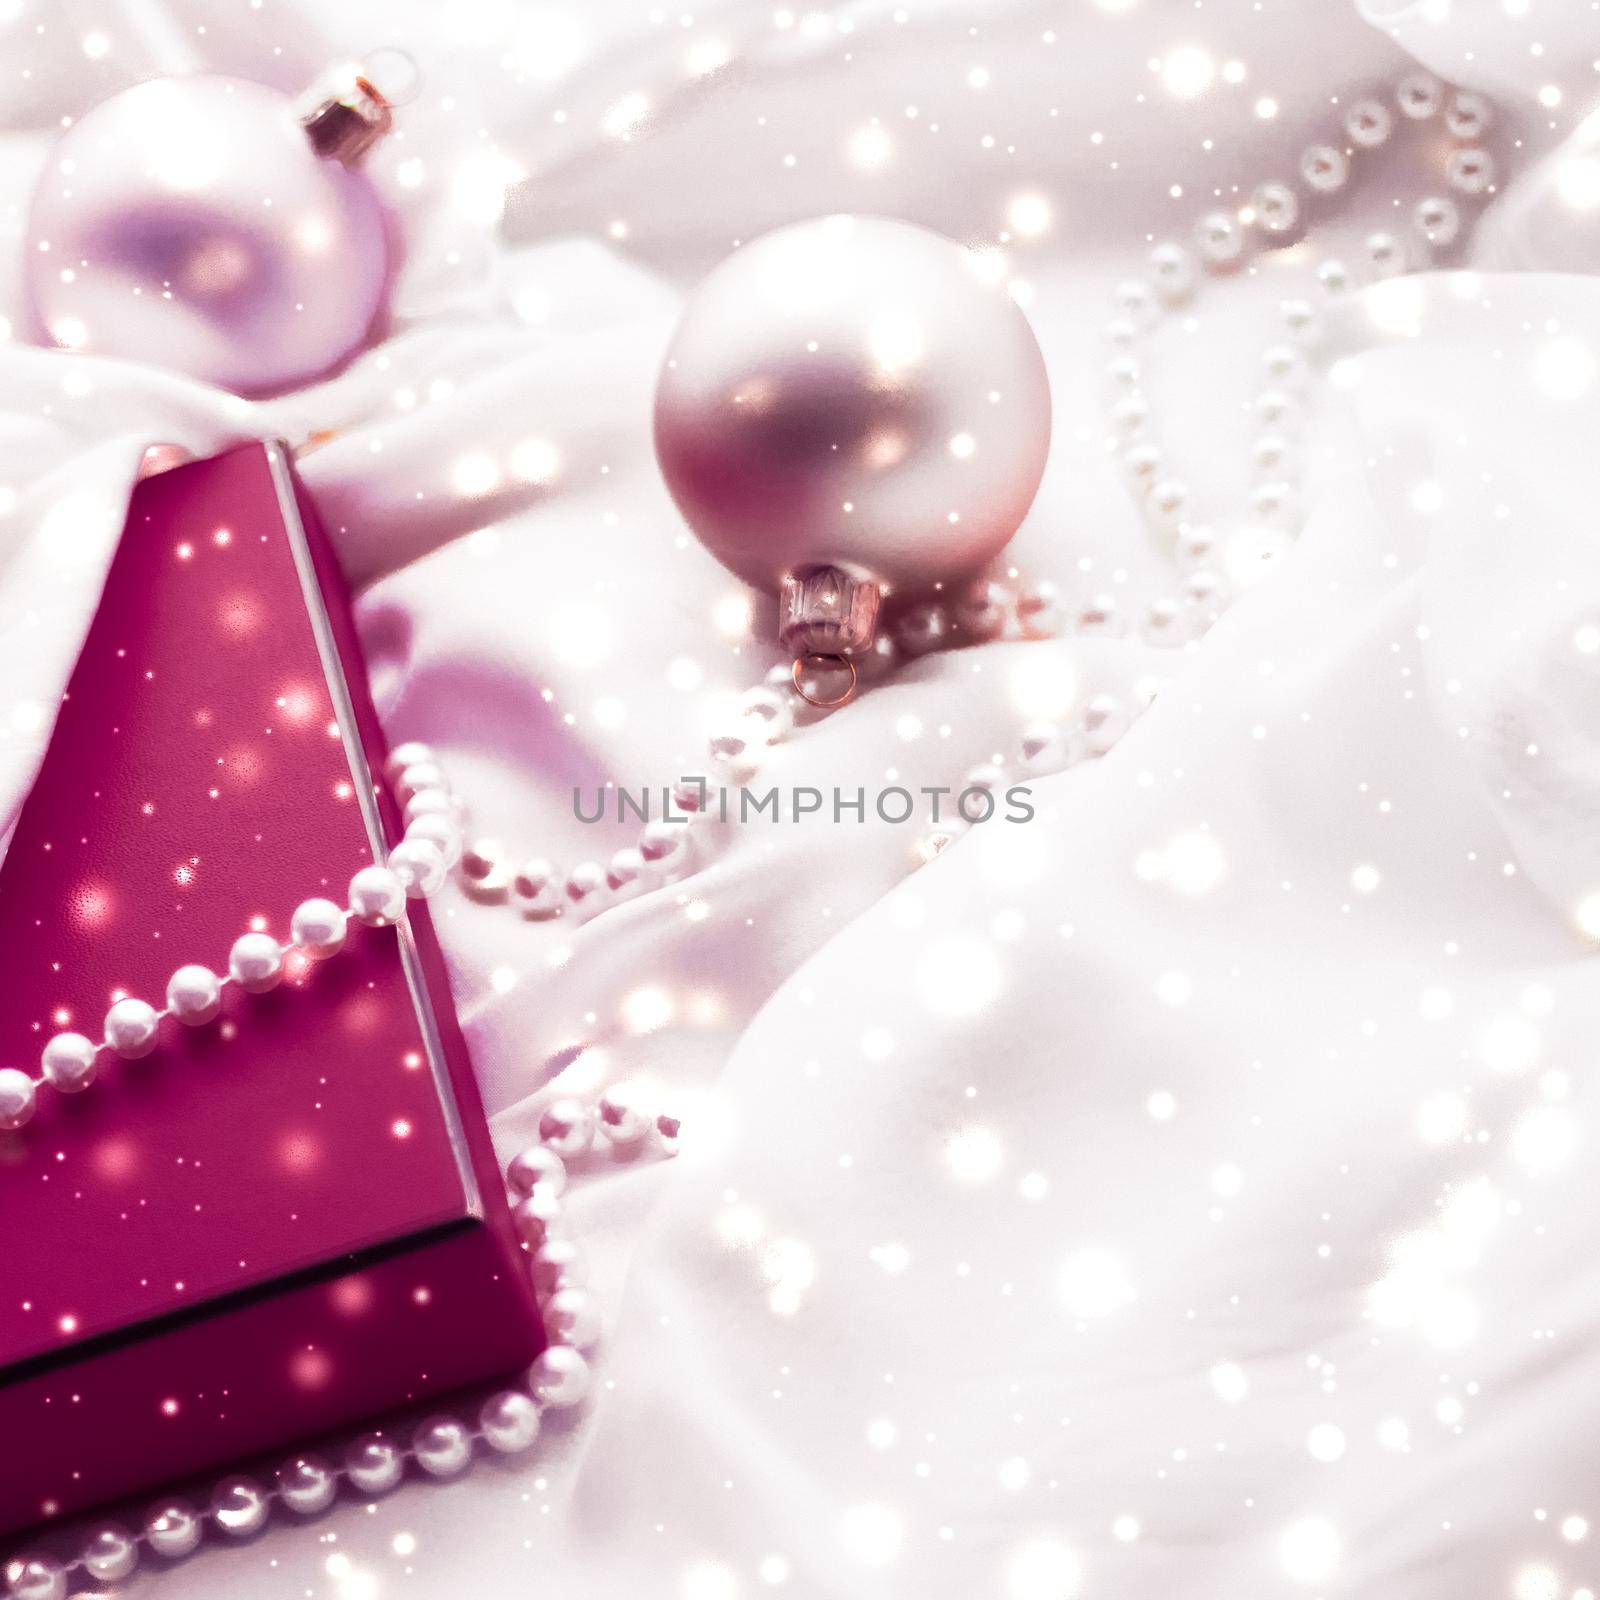 Holidays branding, glamour and decoration concept - Christmas magic holiday background, festive baubles, maroon vintage gift box and golden glitter as winter season present for luxury brand design